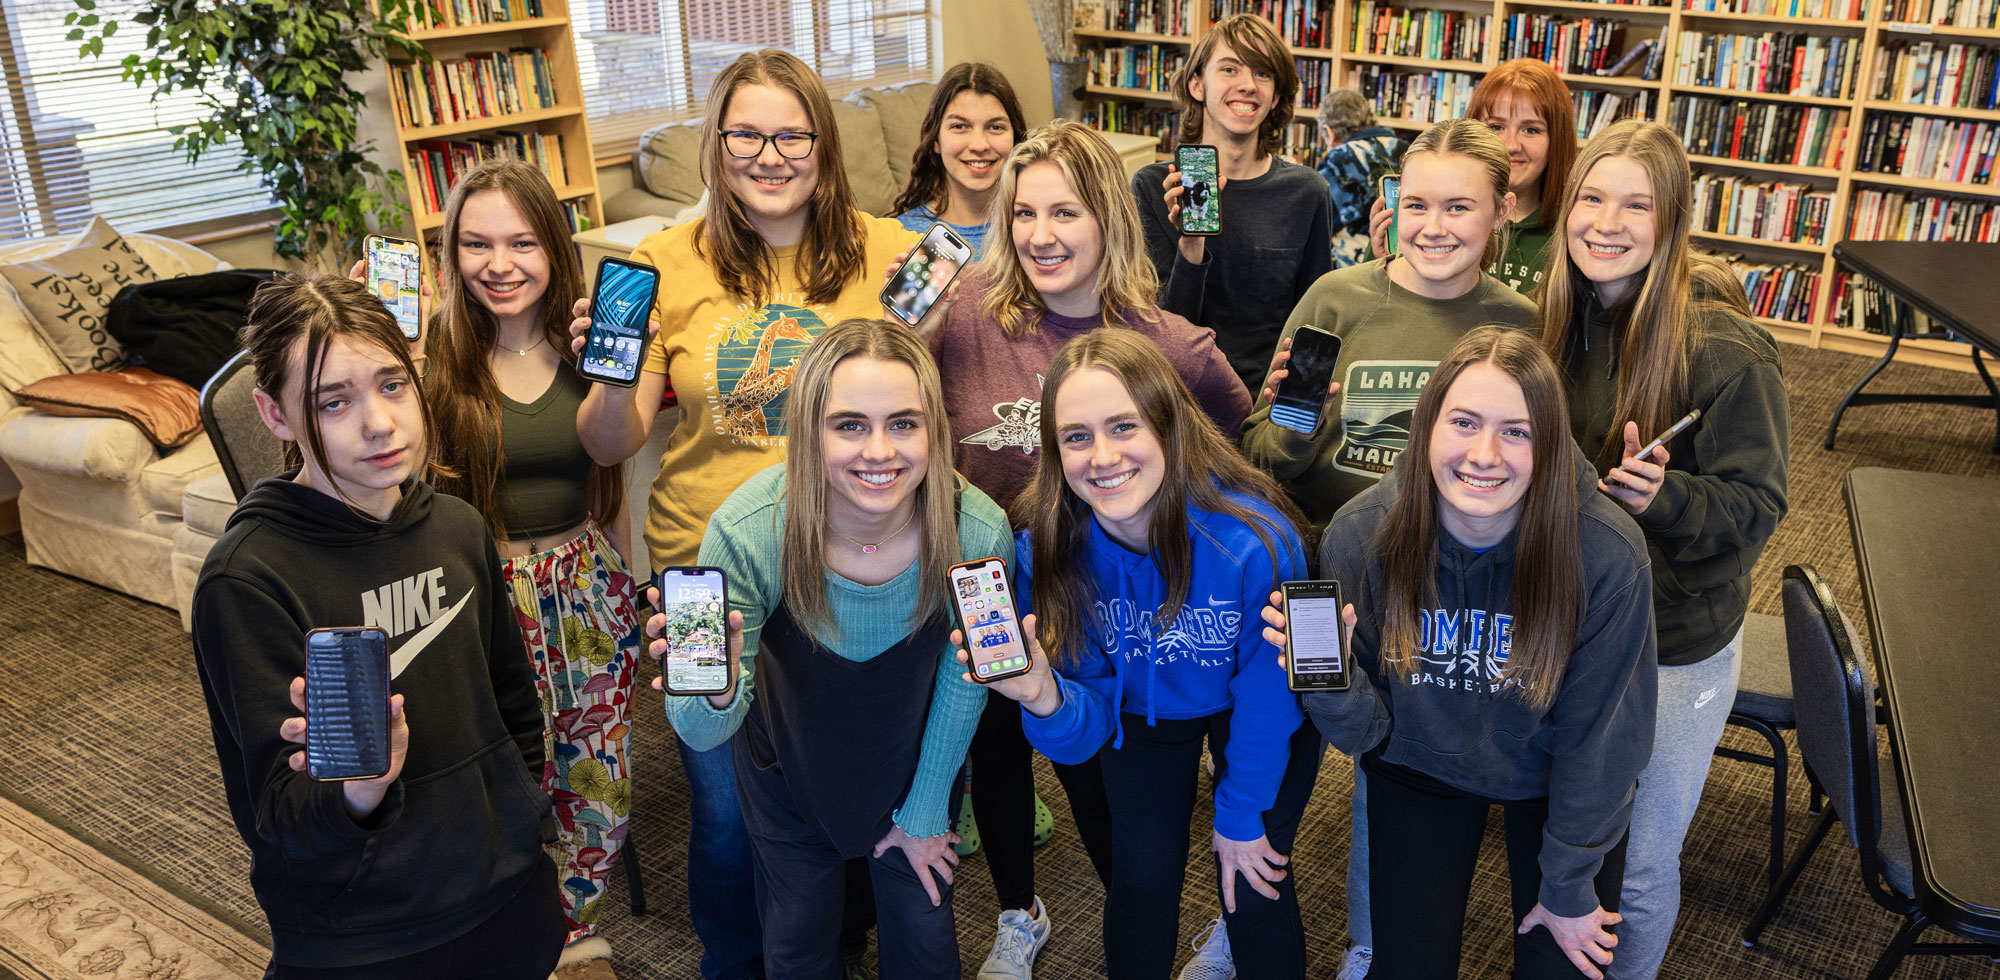 Students with phones